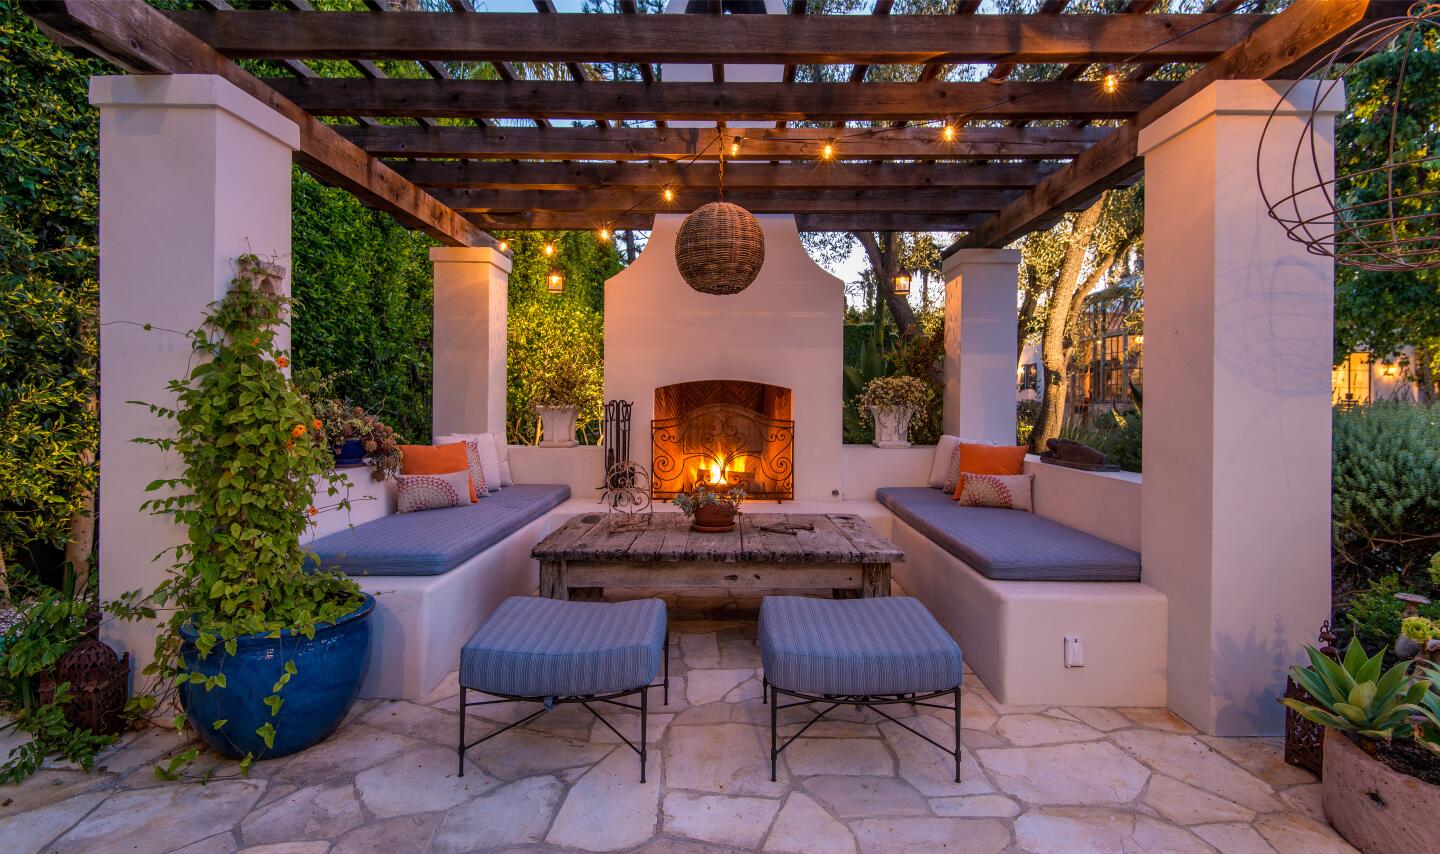 The outdoor fireplace with open slat covering above columns and seating.